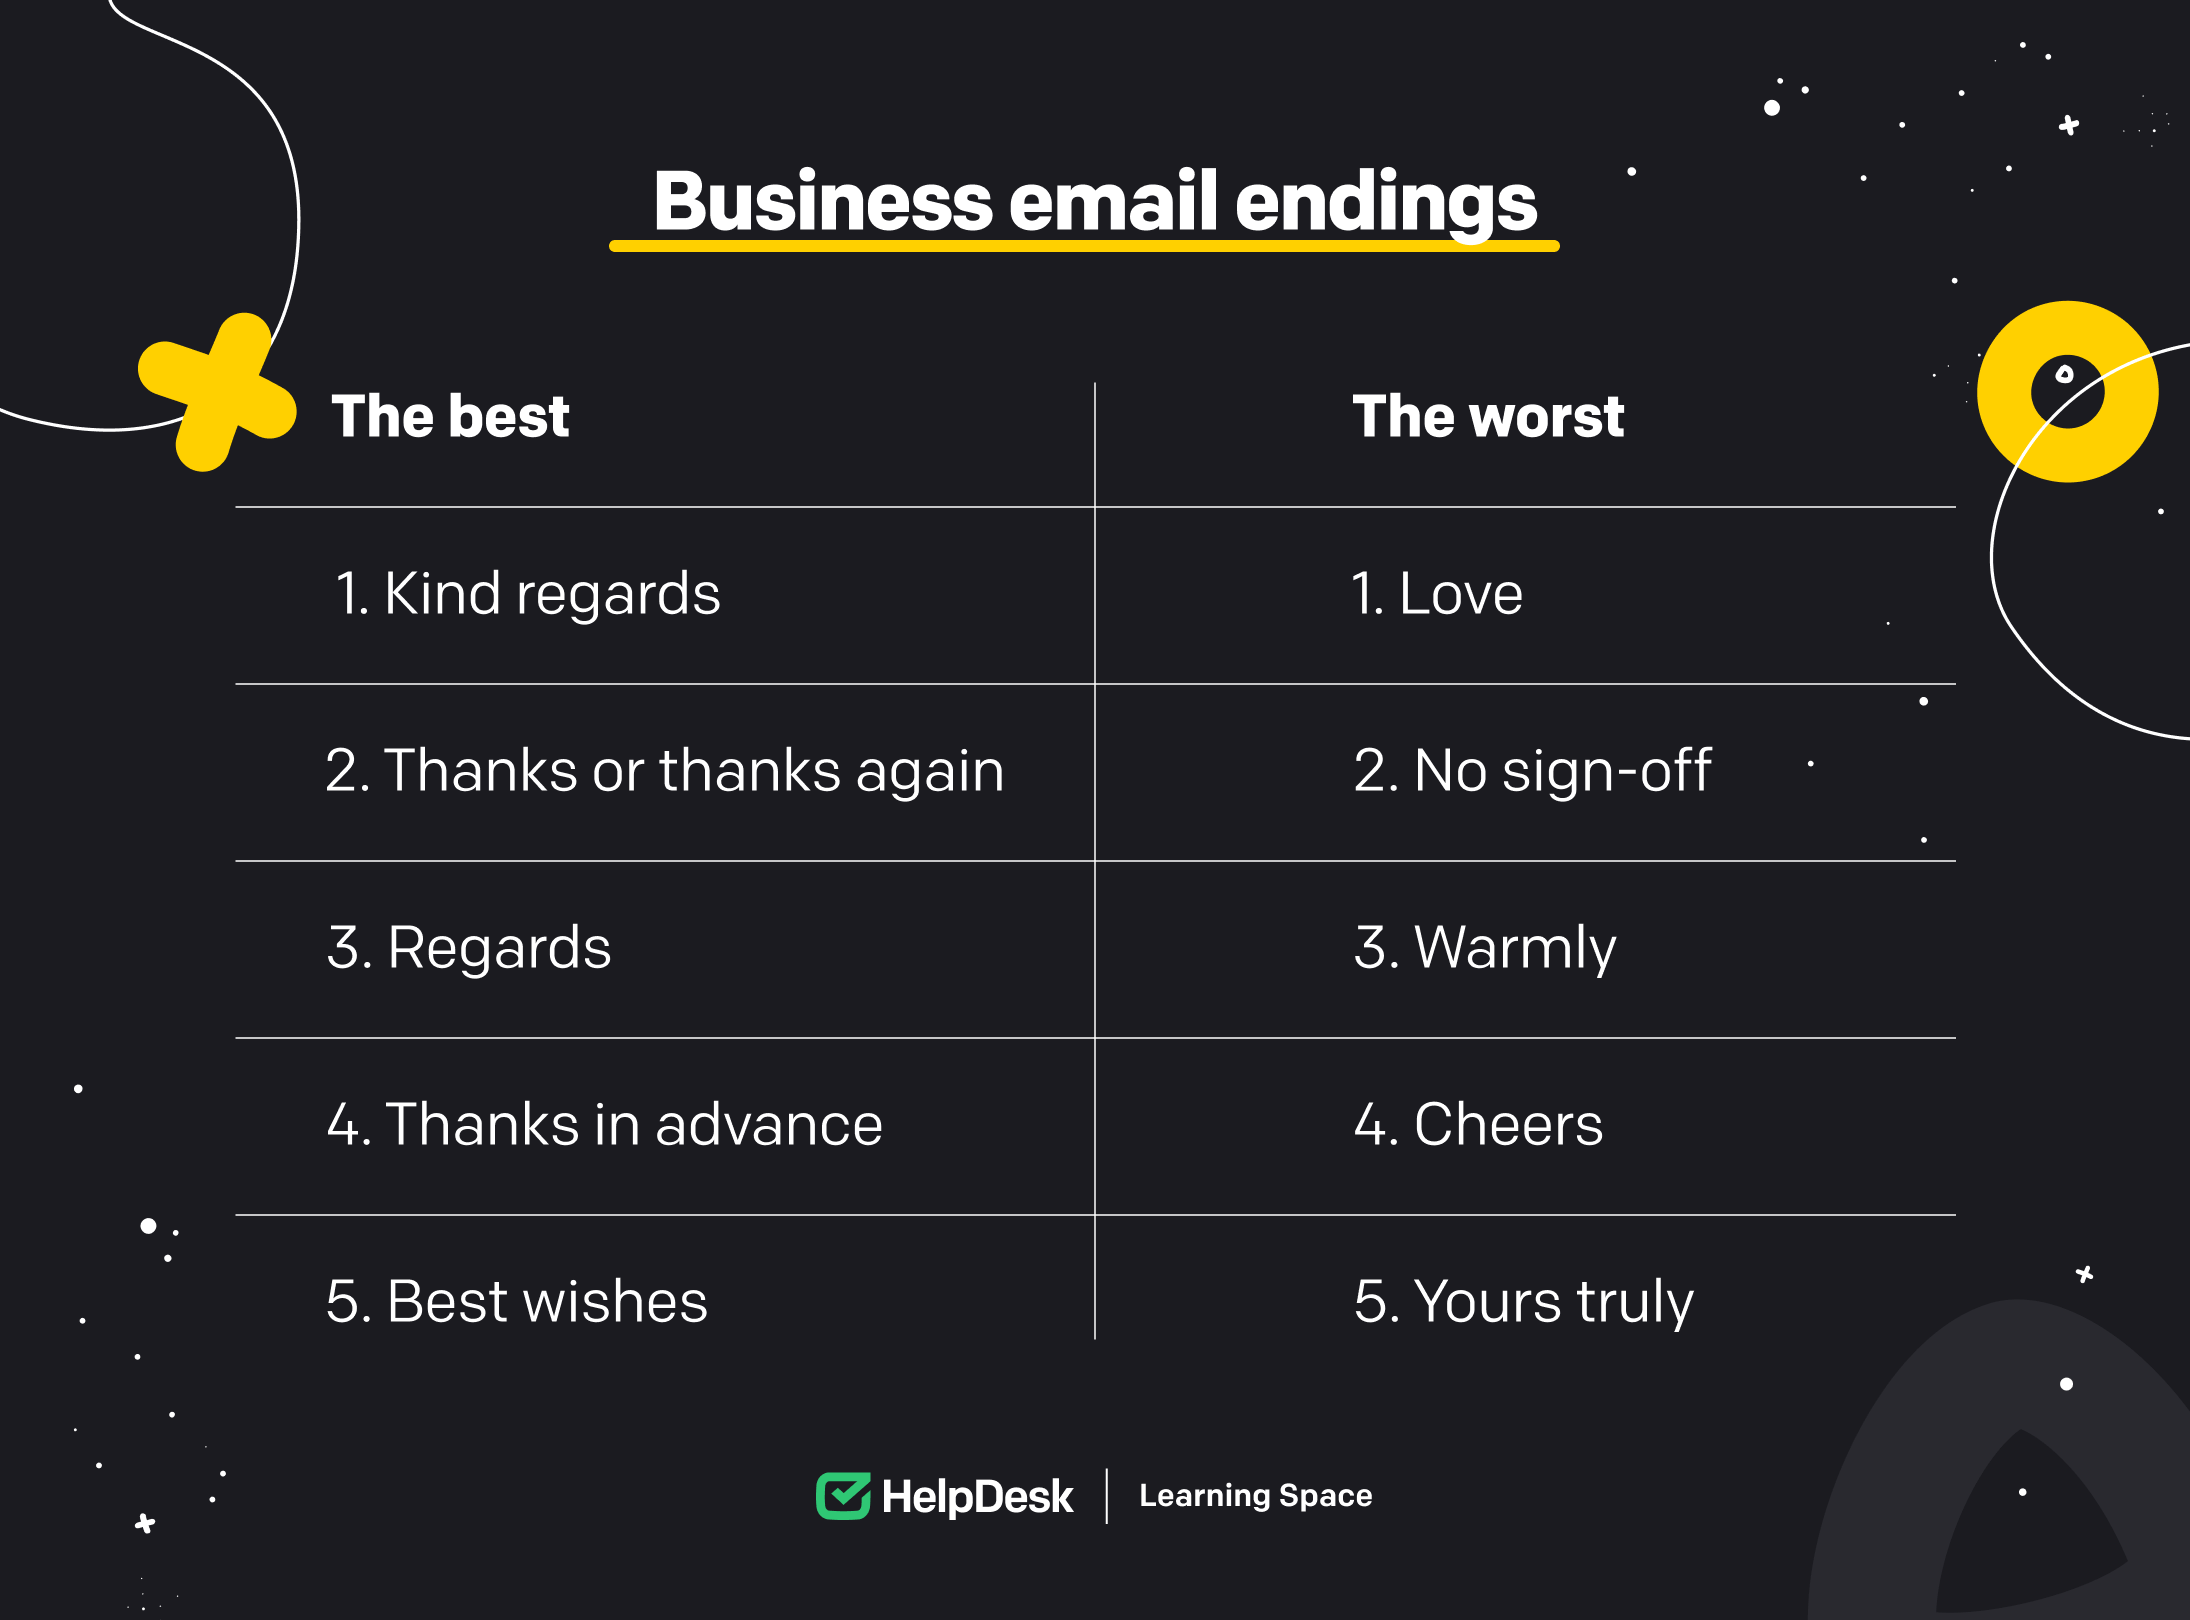 The best and the worst business email endings.